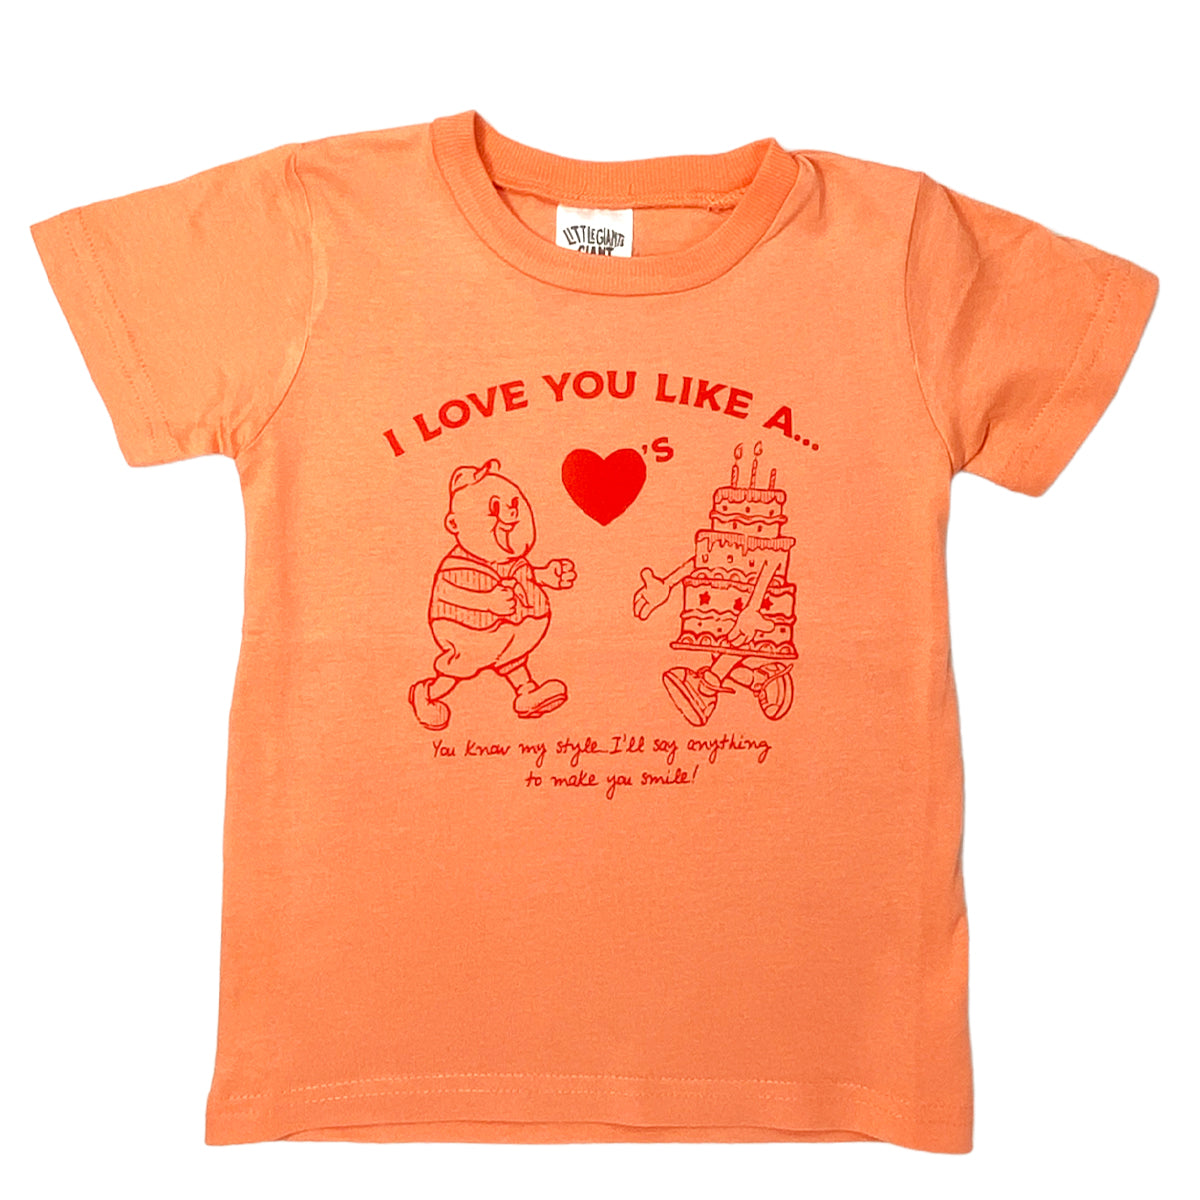 Love You Like T-Shirt (Coral)